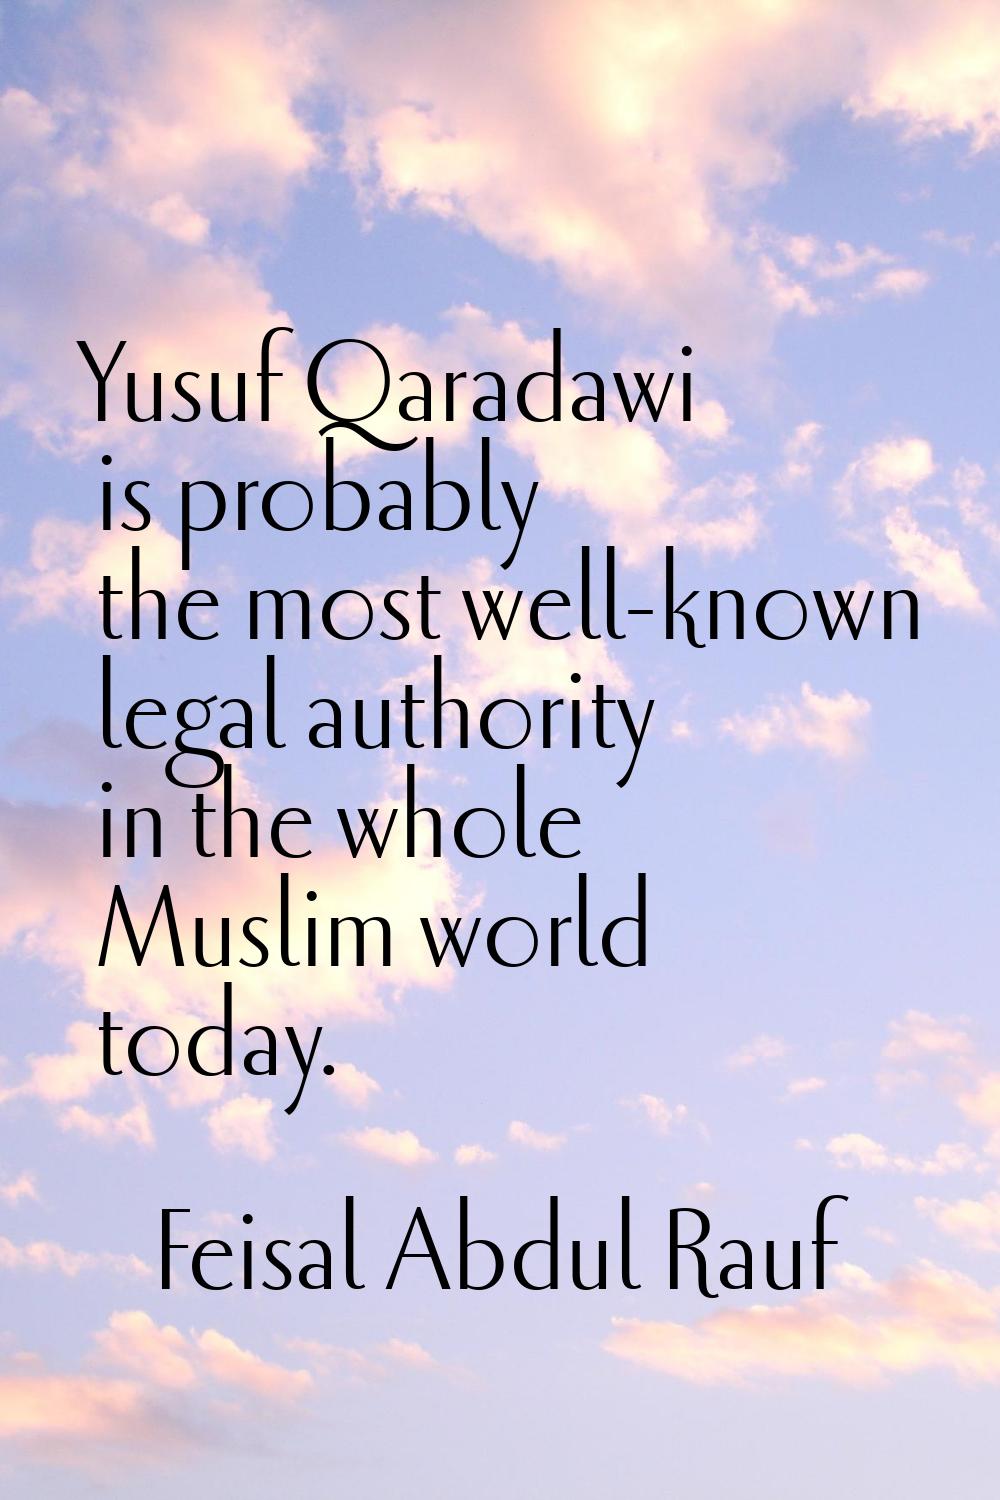 Yusuf Qaradawi is probably the most well-known legal authority in the whole Muslim world today.